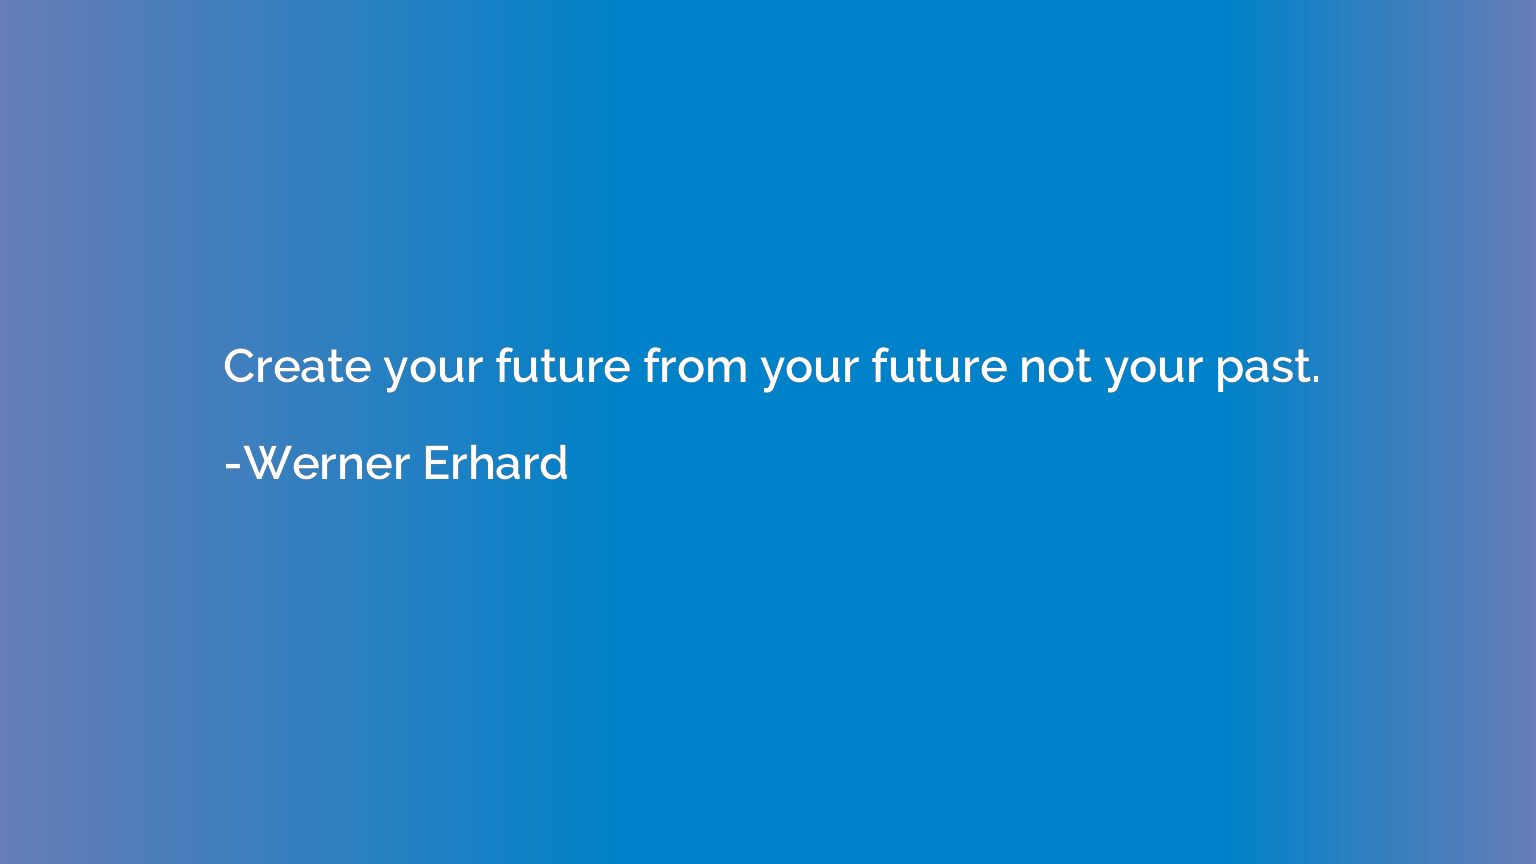 Create your future from your future not your past.